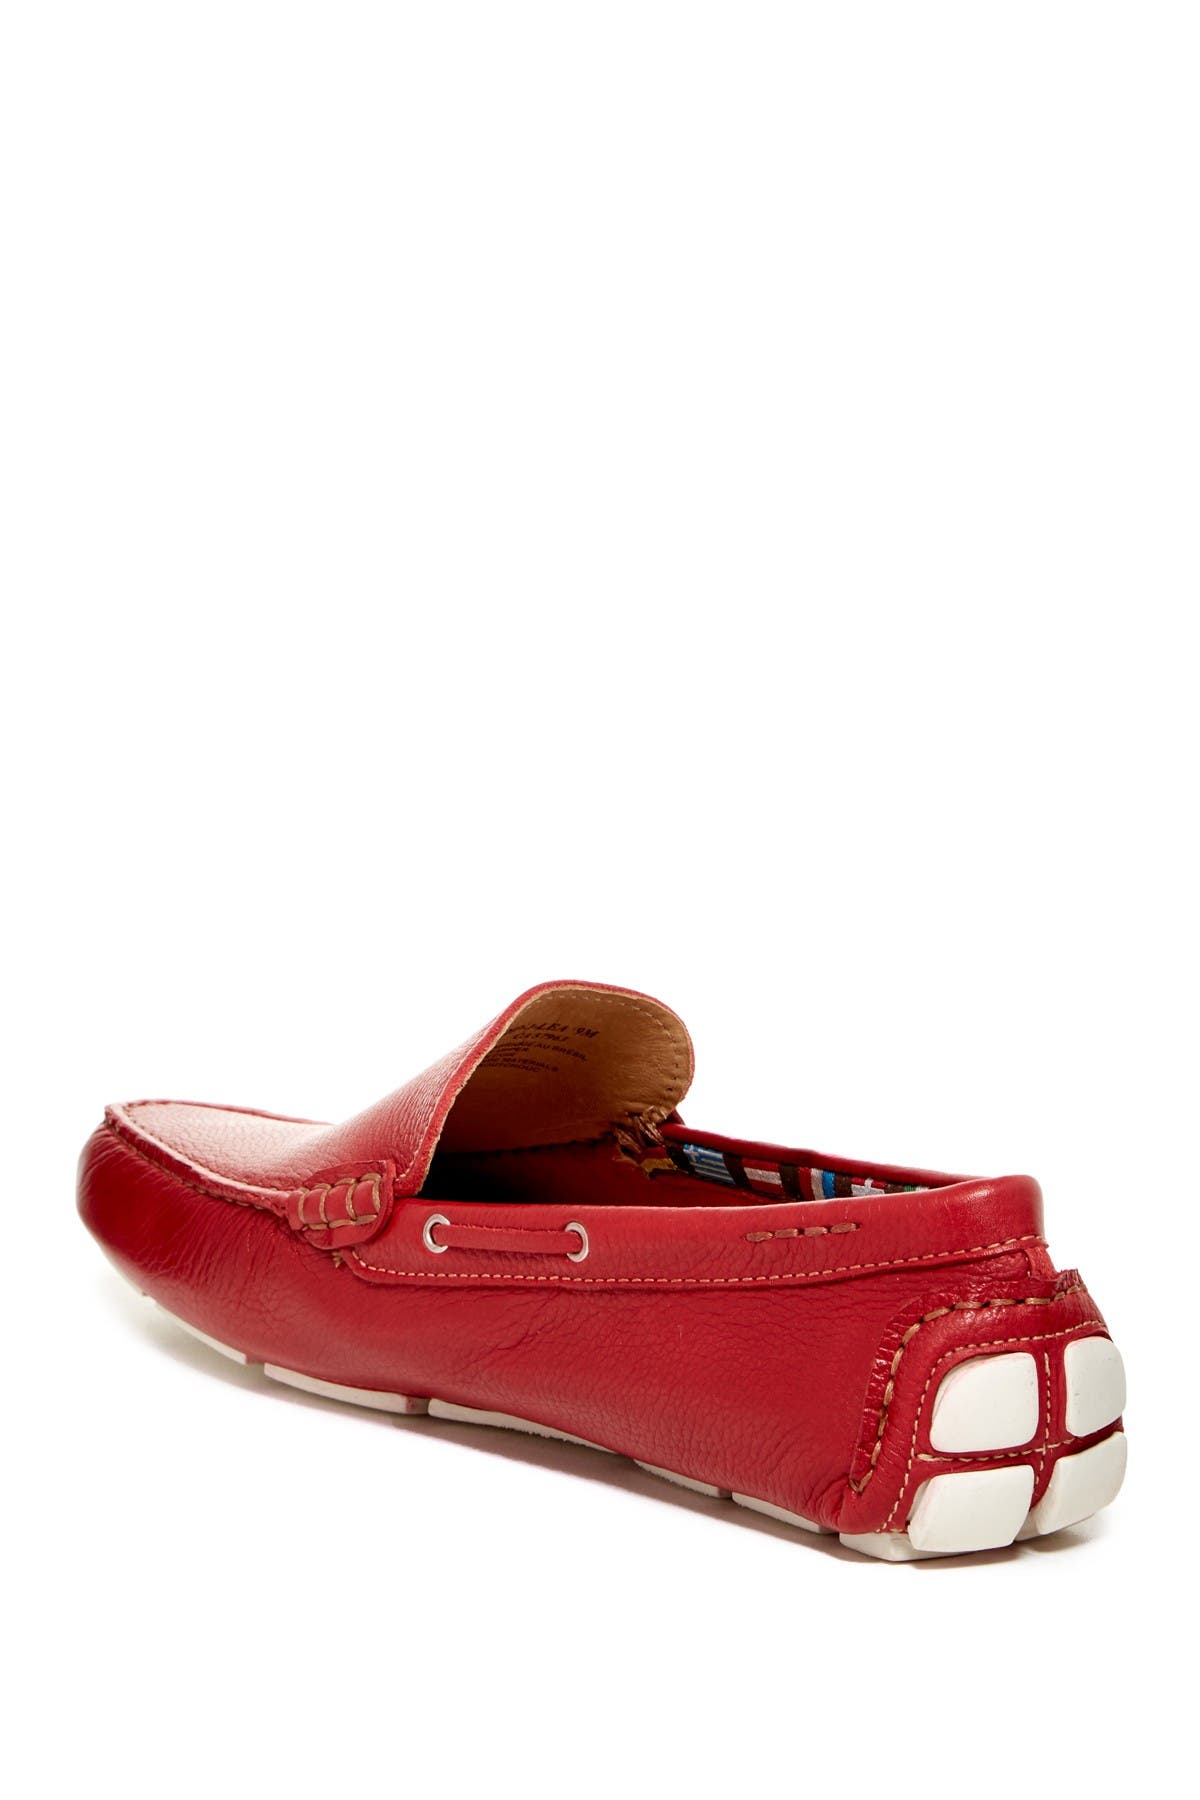 14th and union mens loafers